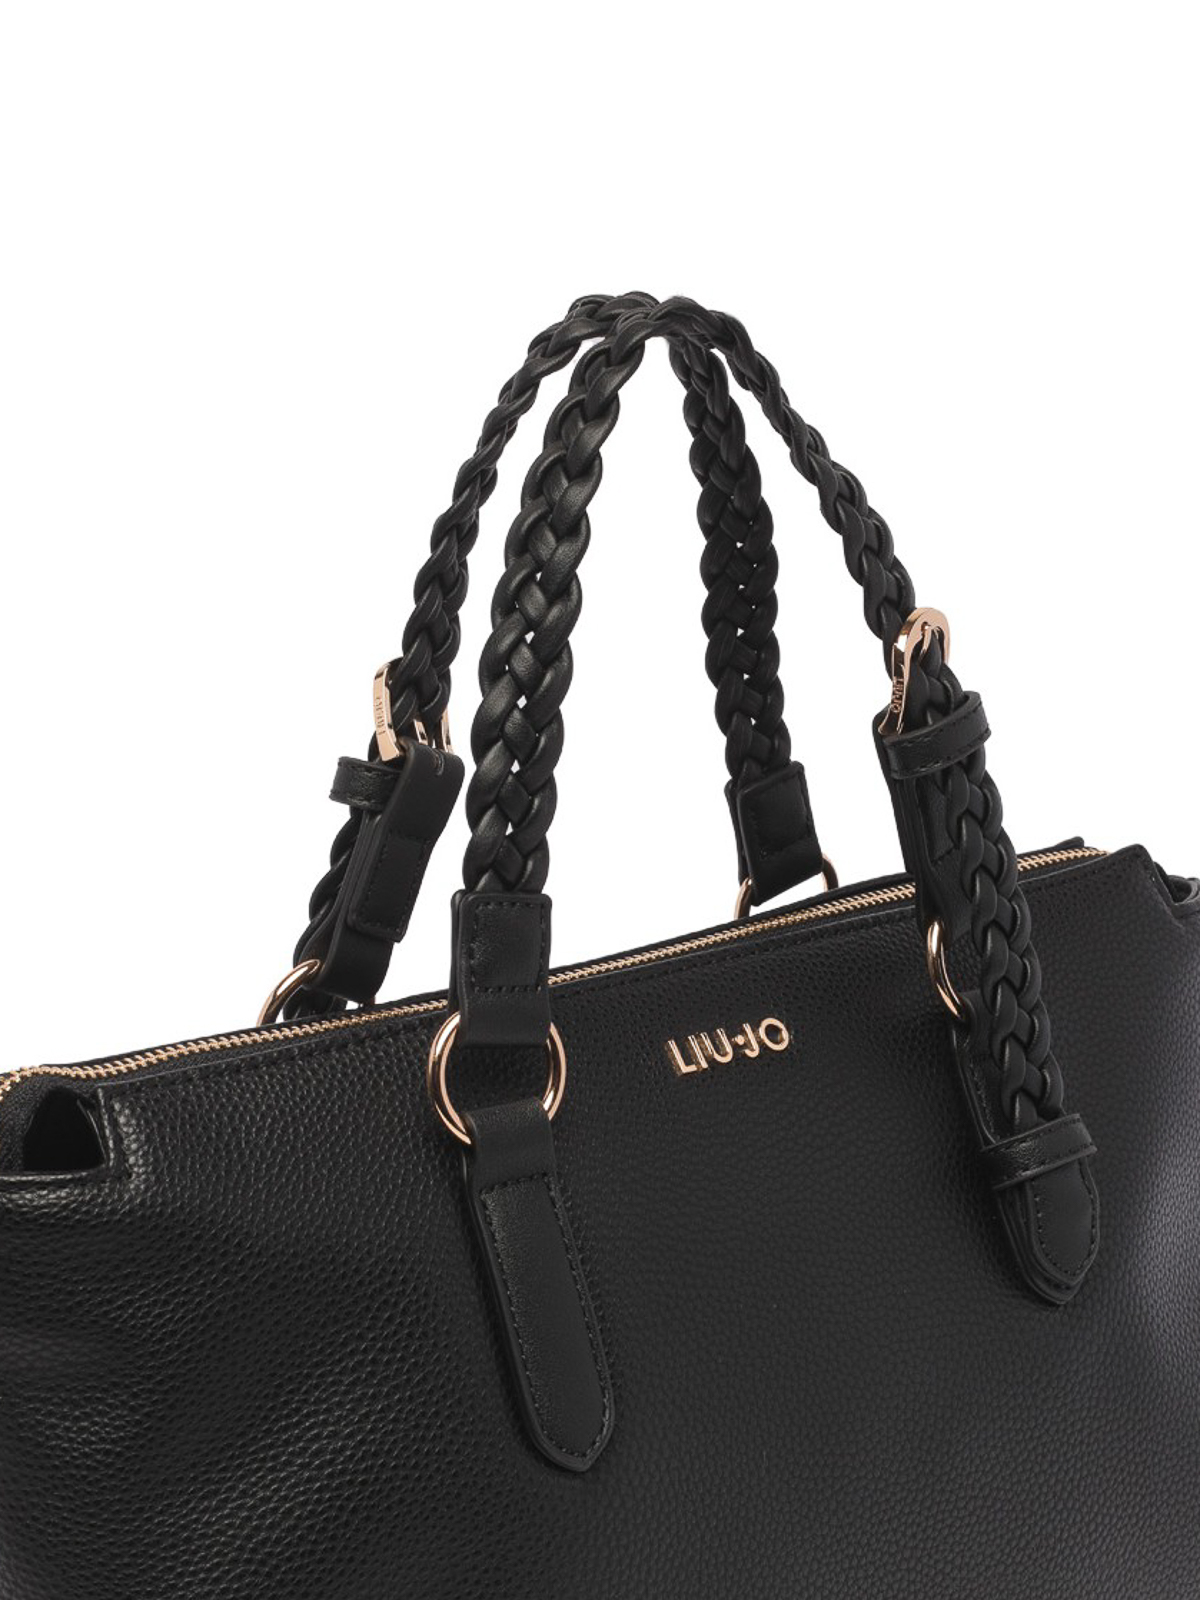 pasta Alexander Graham Bell Pensionista Totes bags Liu Jo - Eco-friendly bag with braided handles - AA3101E008622222